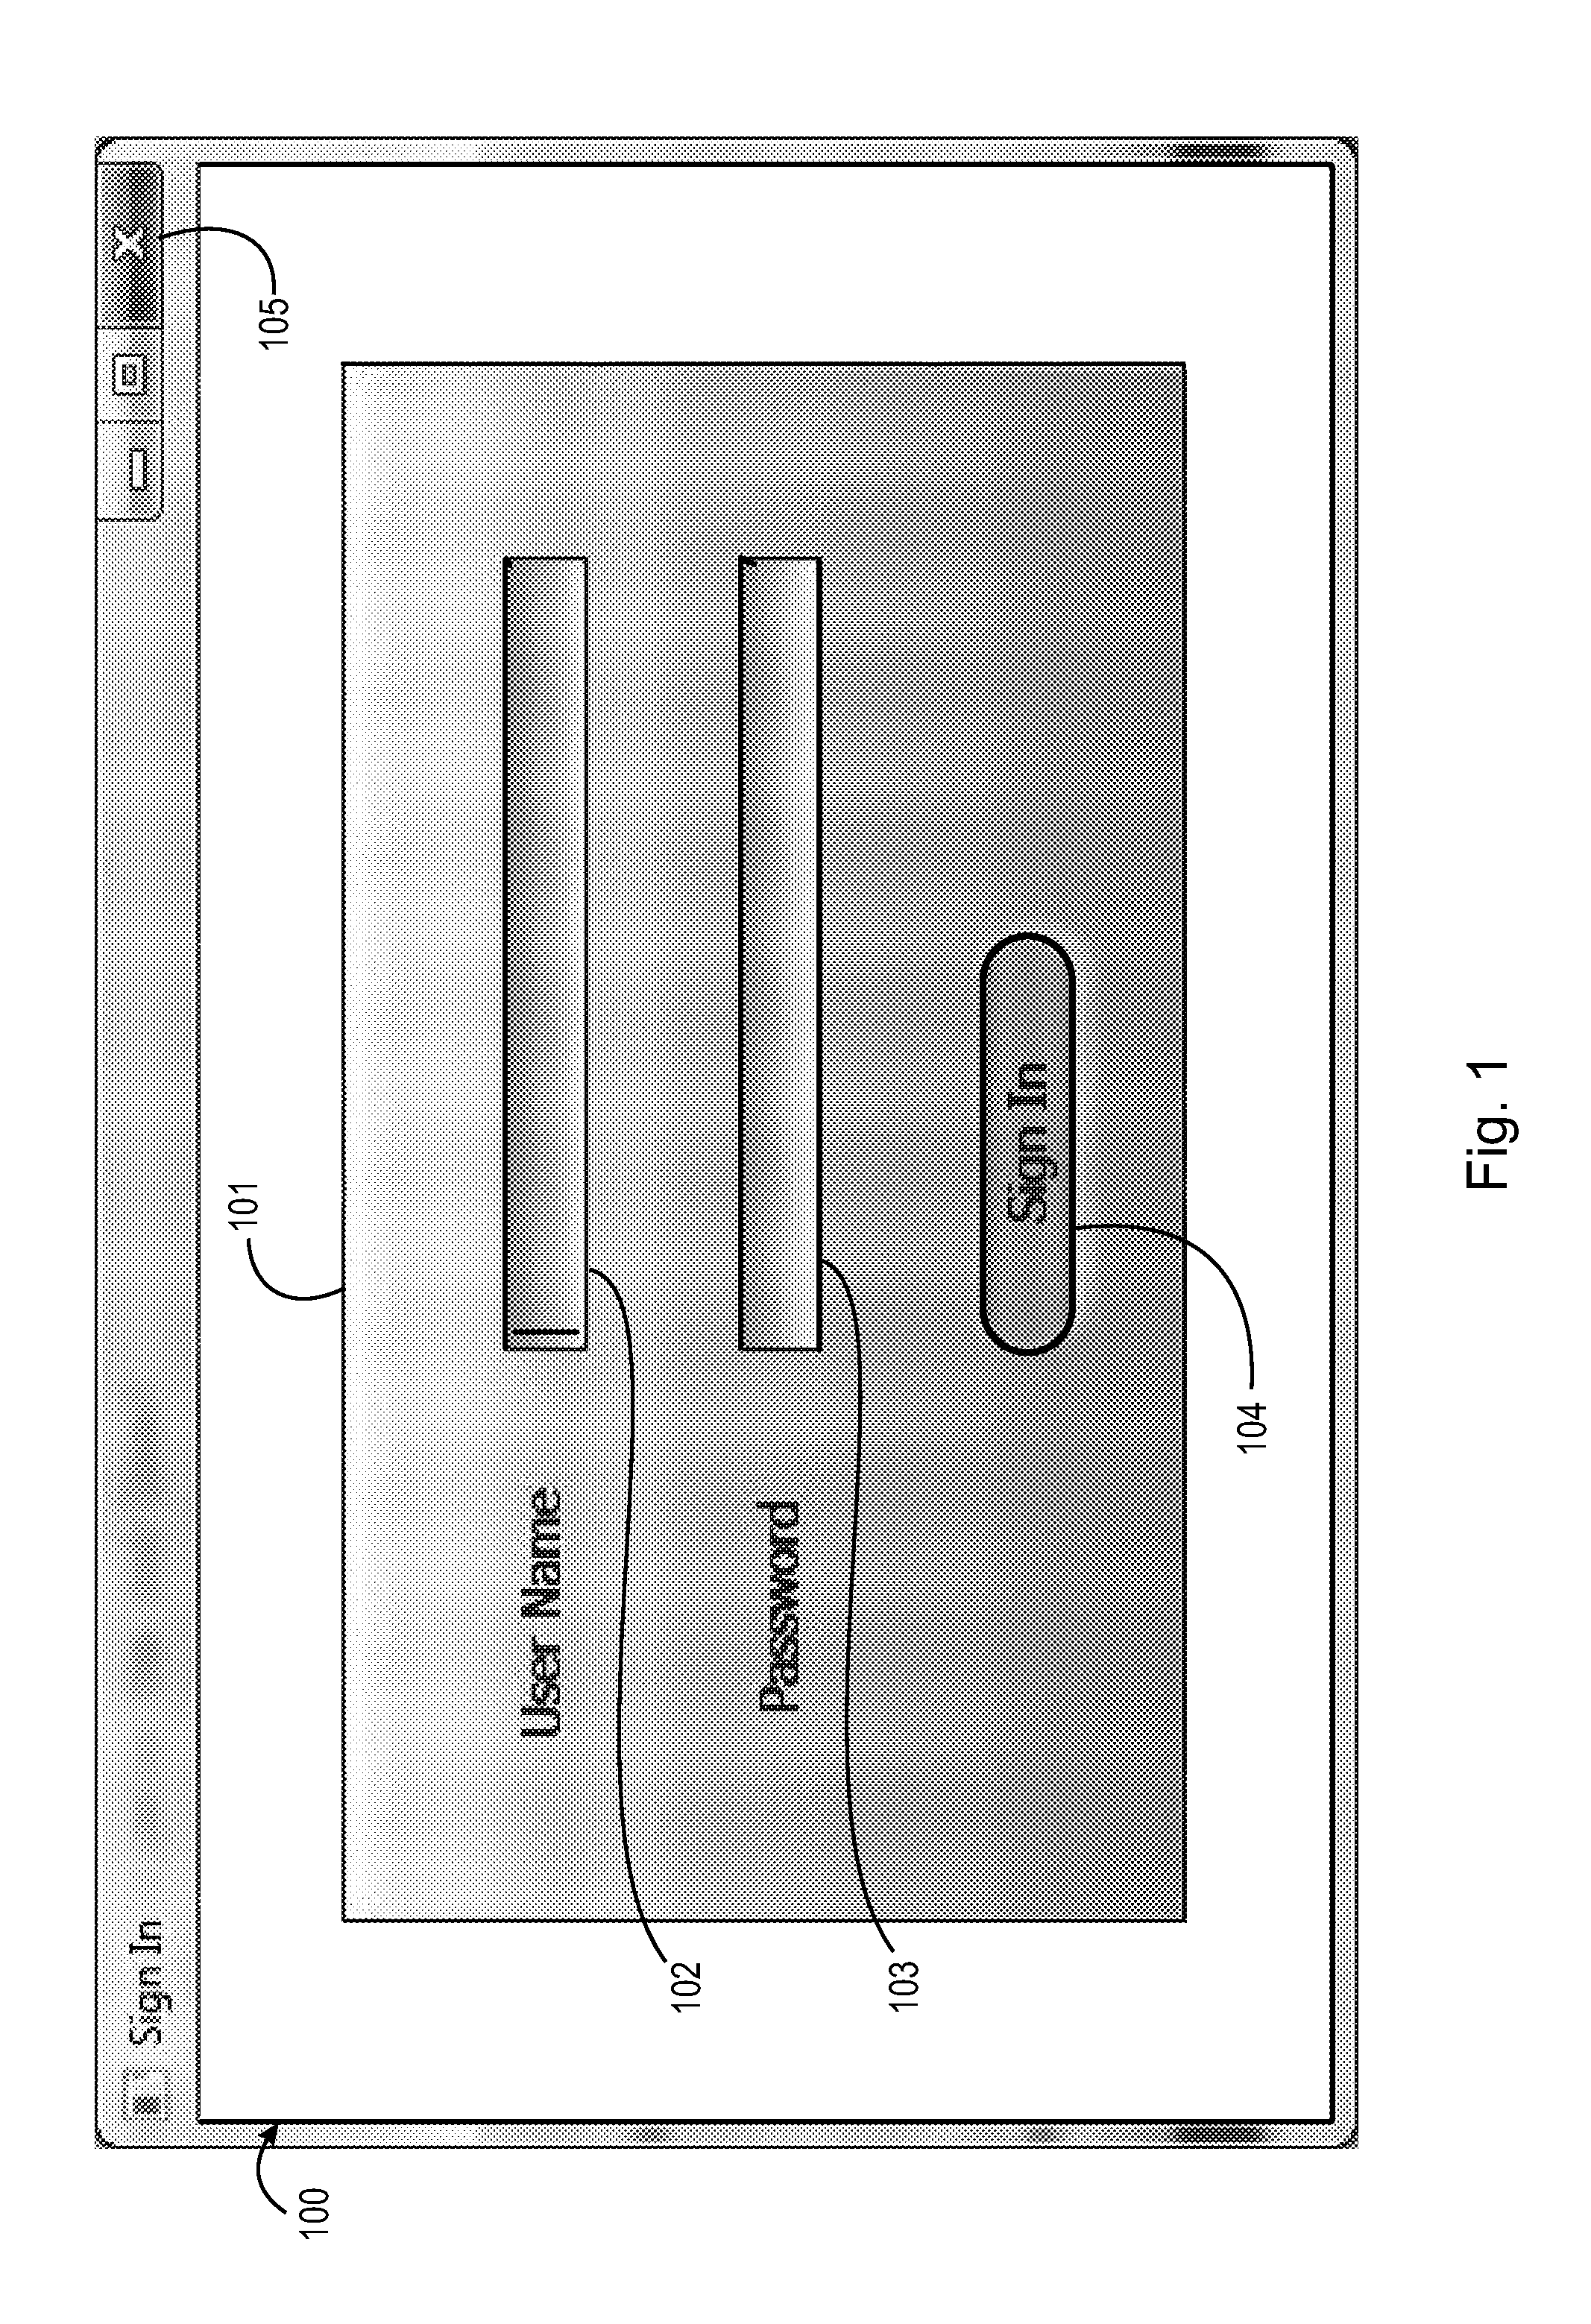 Method and apparatus for testing for color vision loss